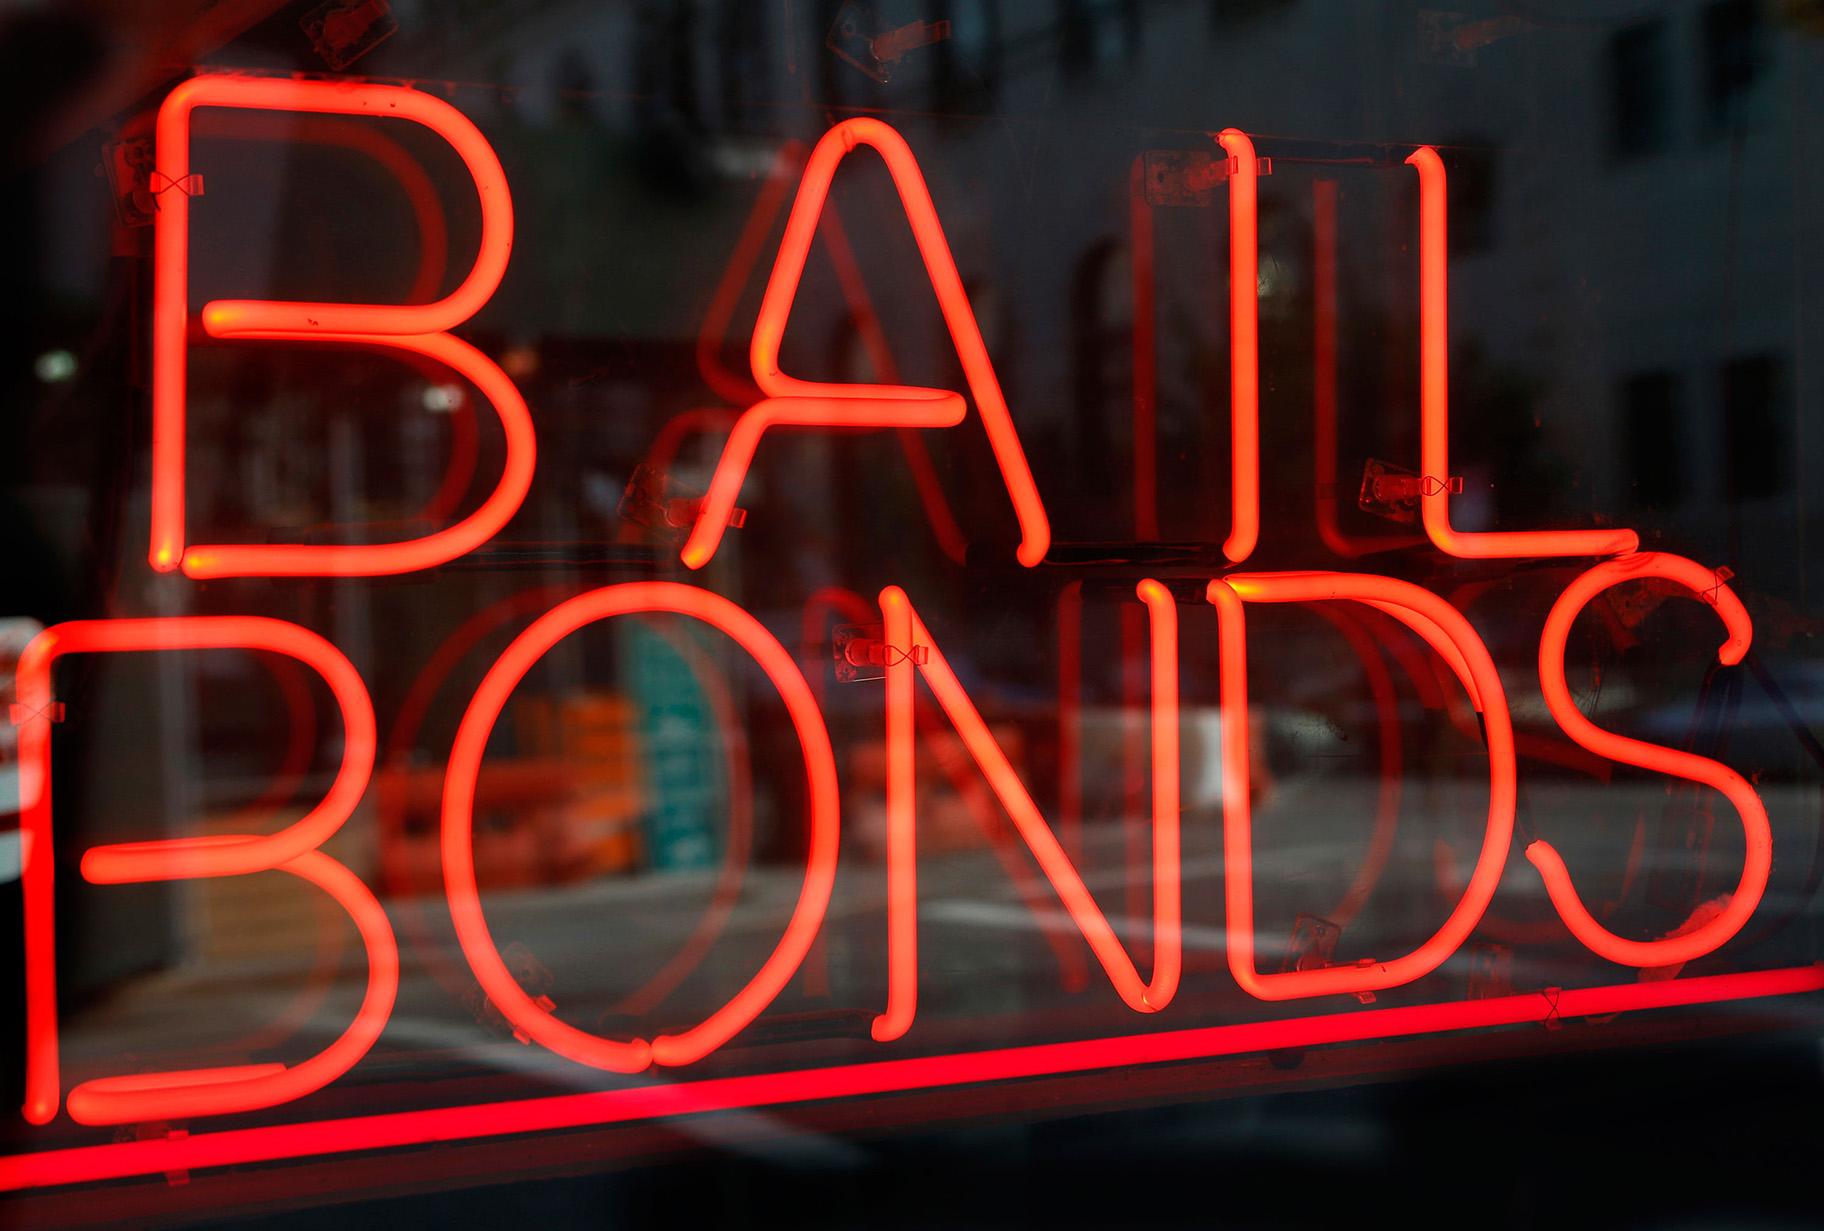 This file photo shows a sign advertising a bail bonds business in the Brooklyn borough of New York. (Kathy Willens / AP)